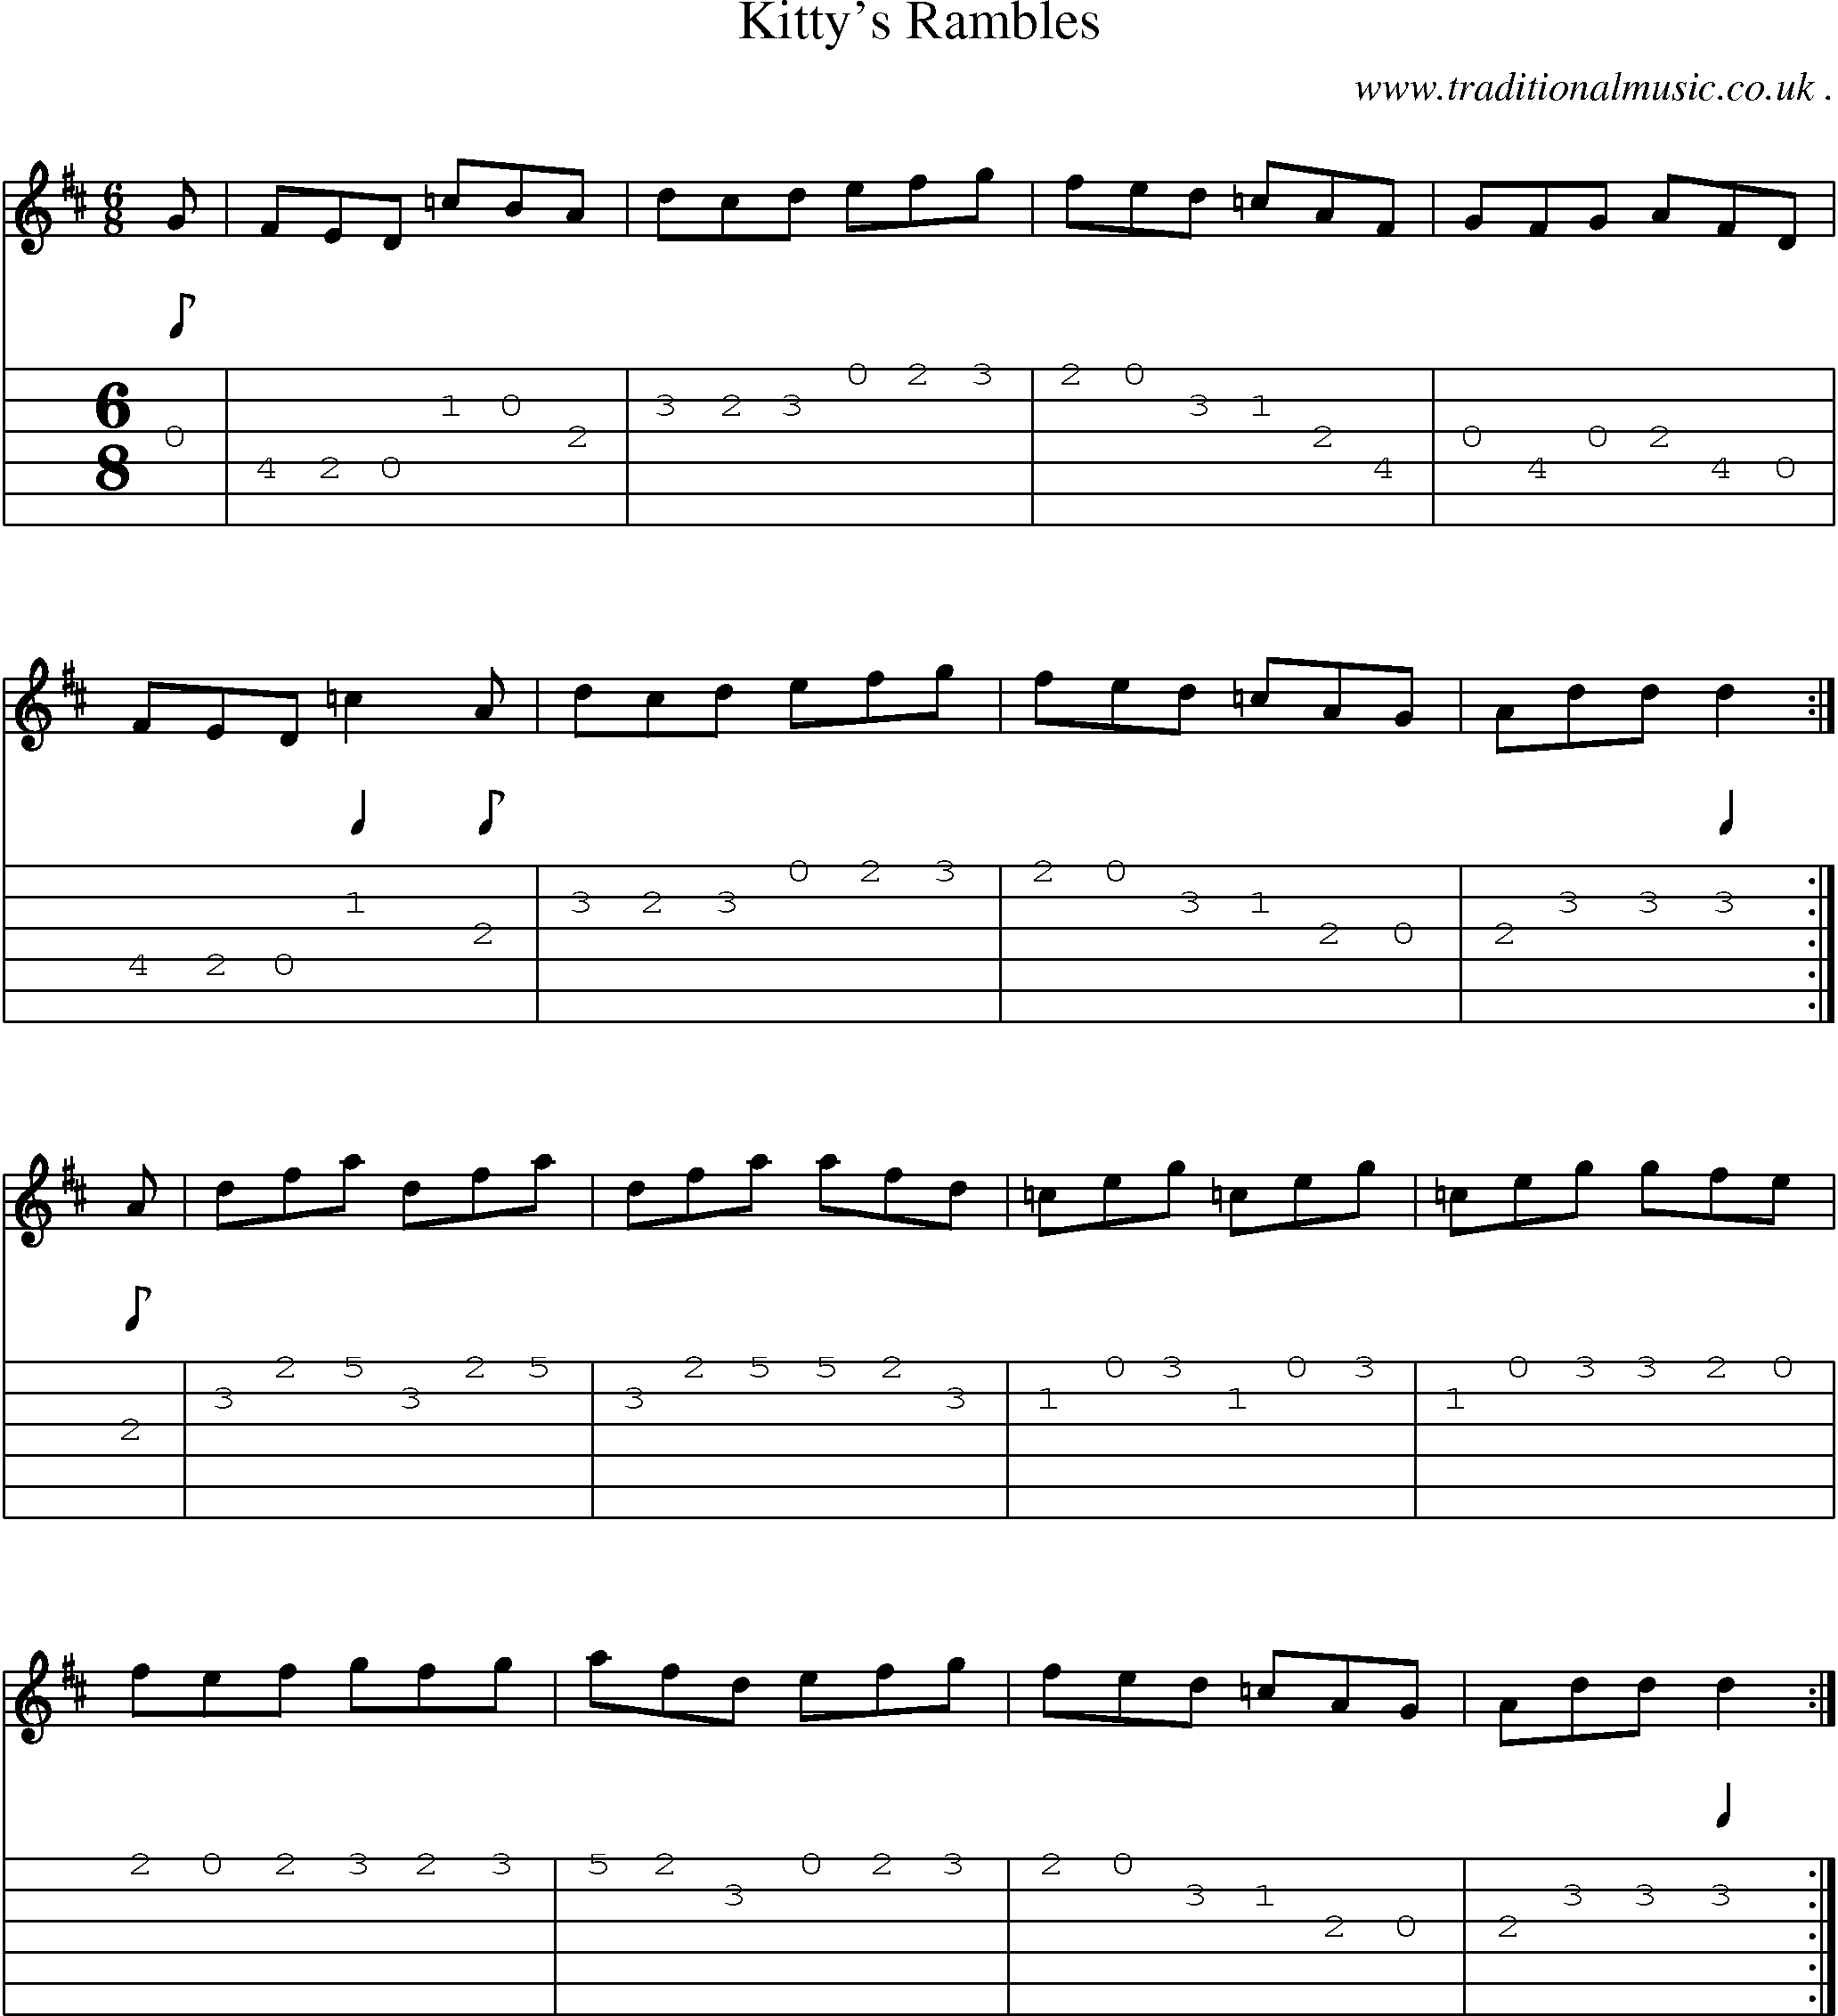 Sheet-Music and Guitar Tabs for Kittys Rambles